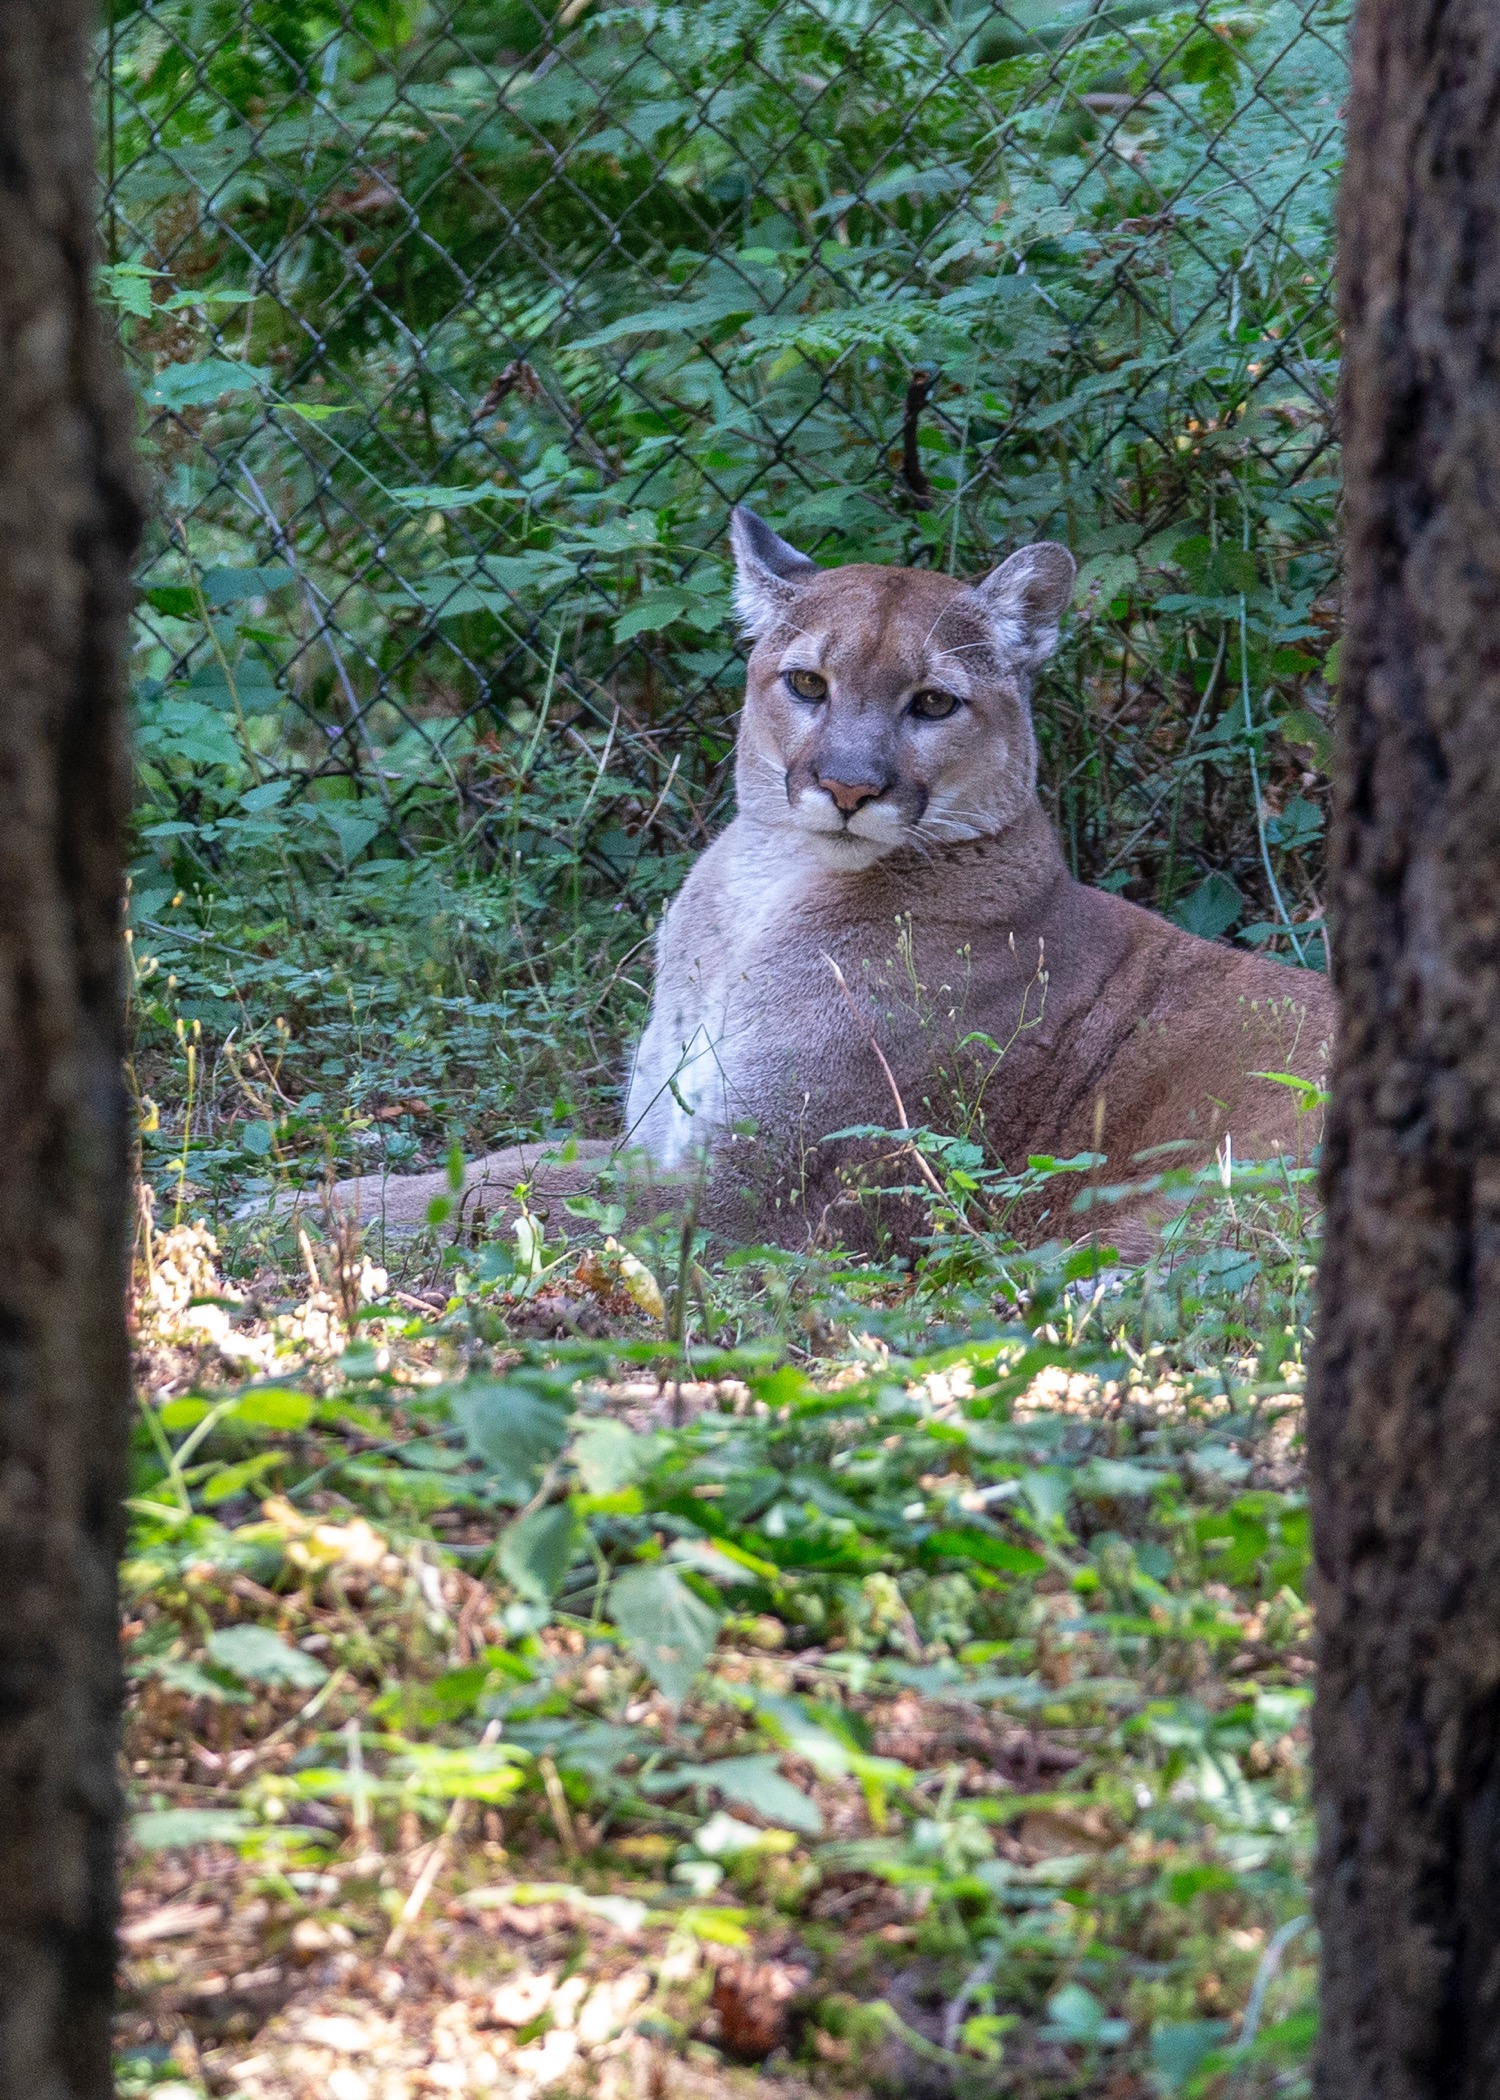  But the cougar was feeling a bit more lazy. 